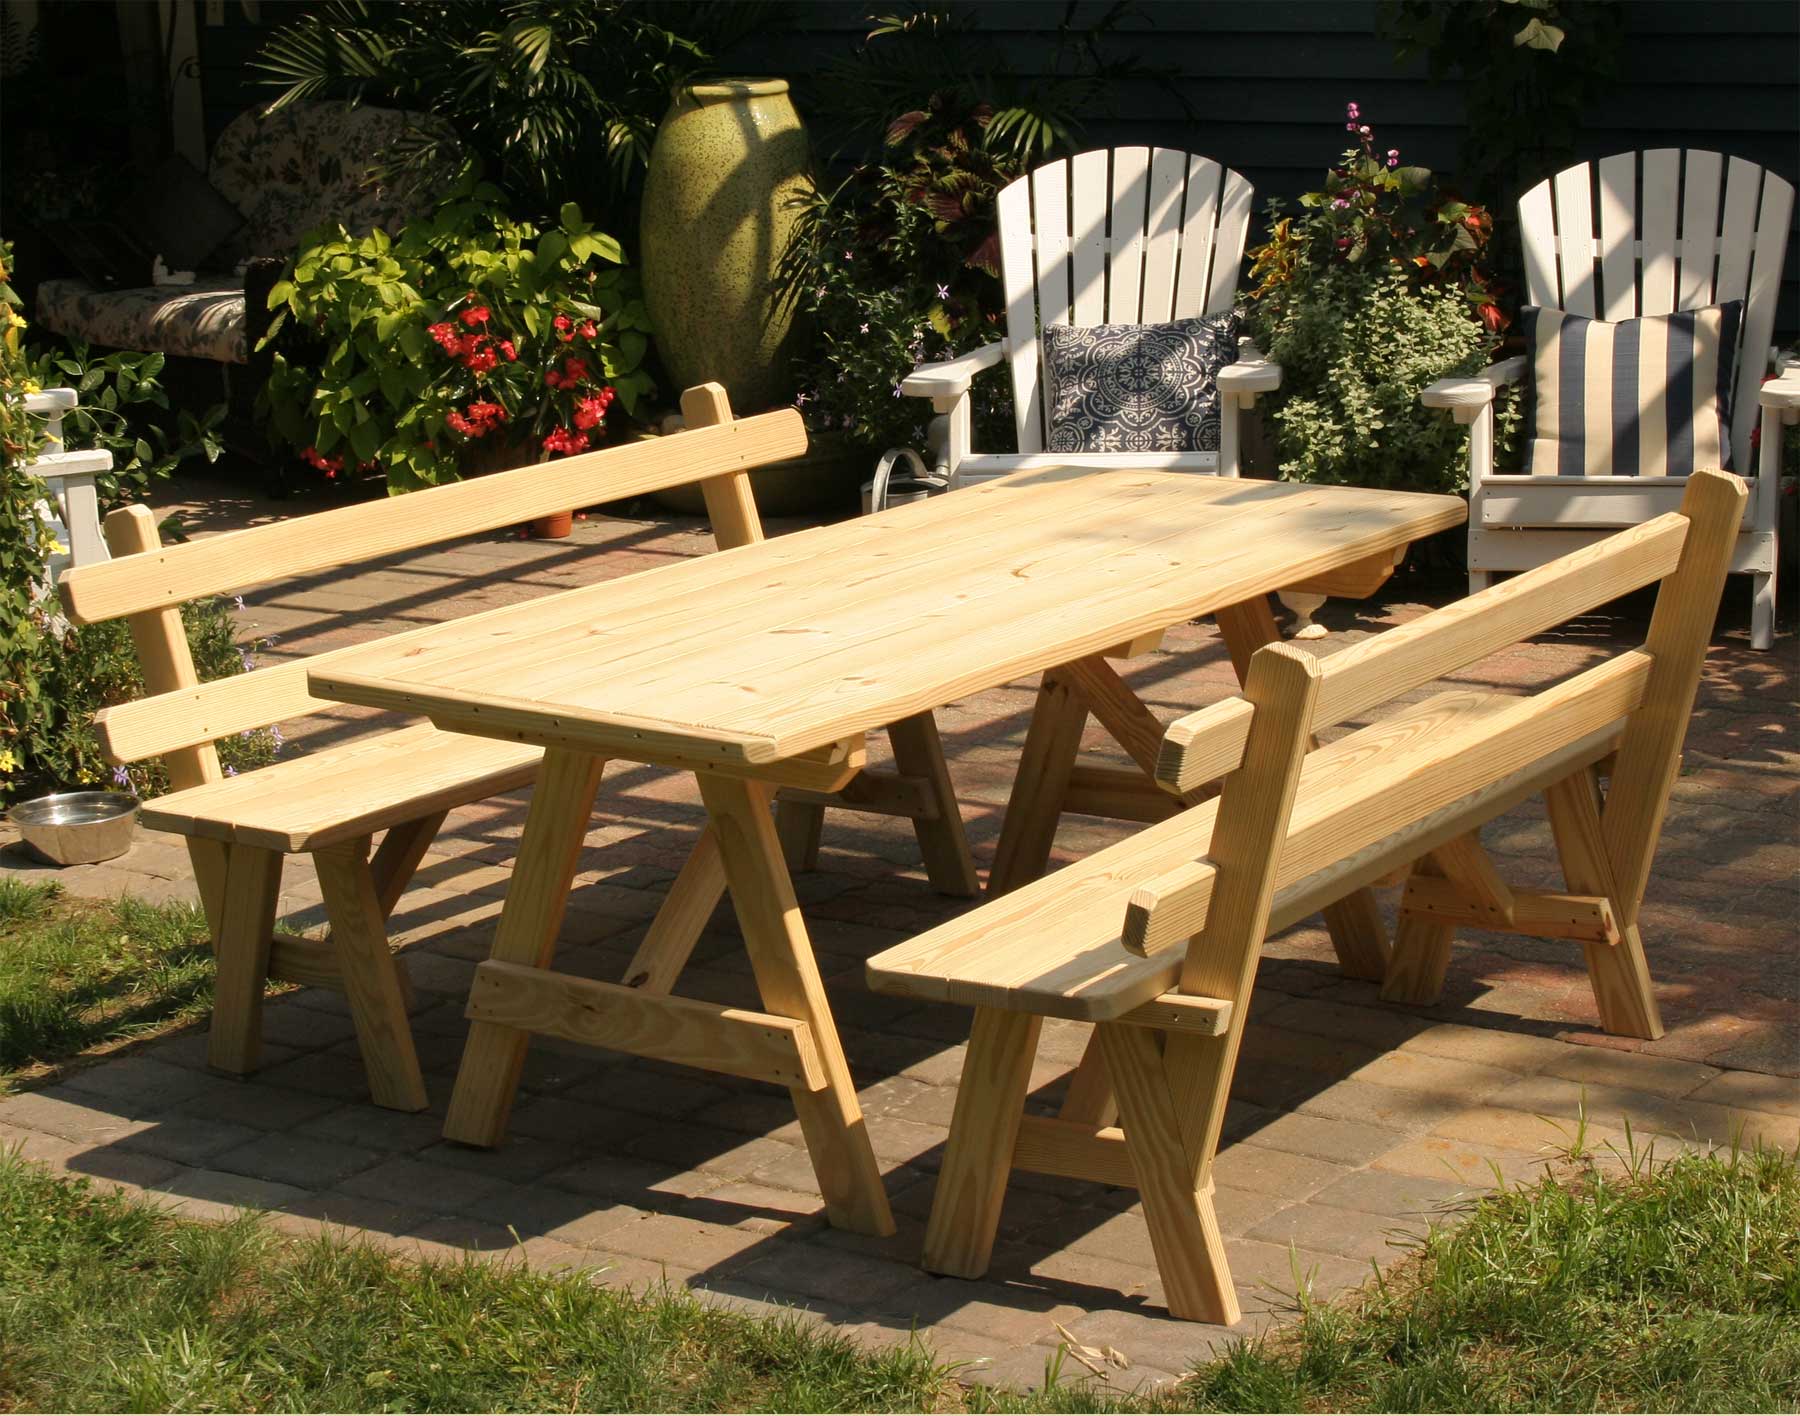 free round wooden picnic table plans | Quick Woodworking ...